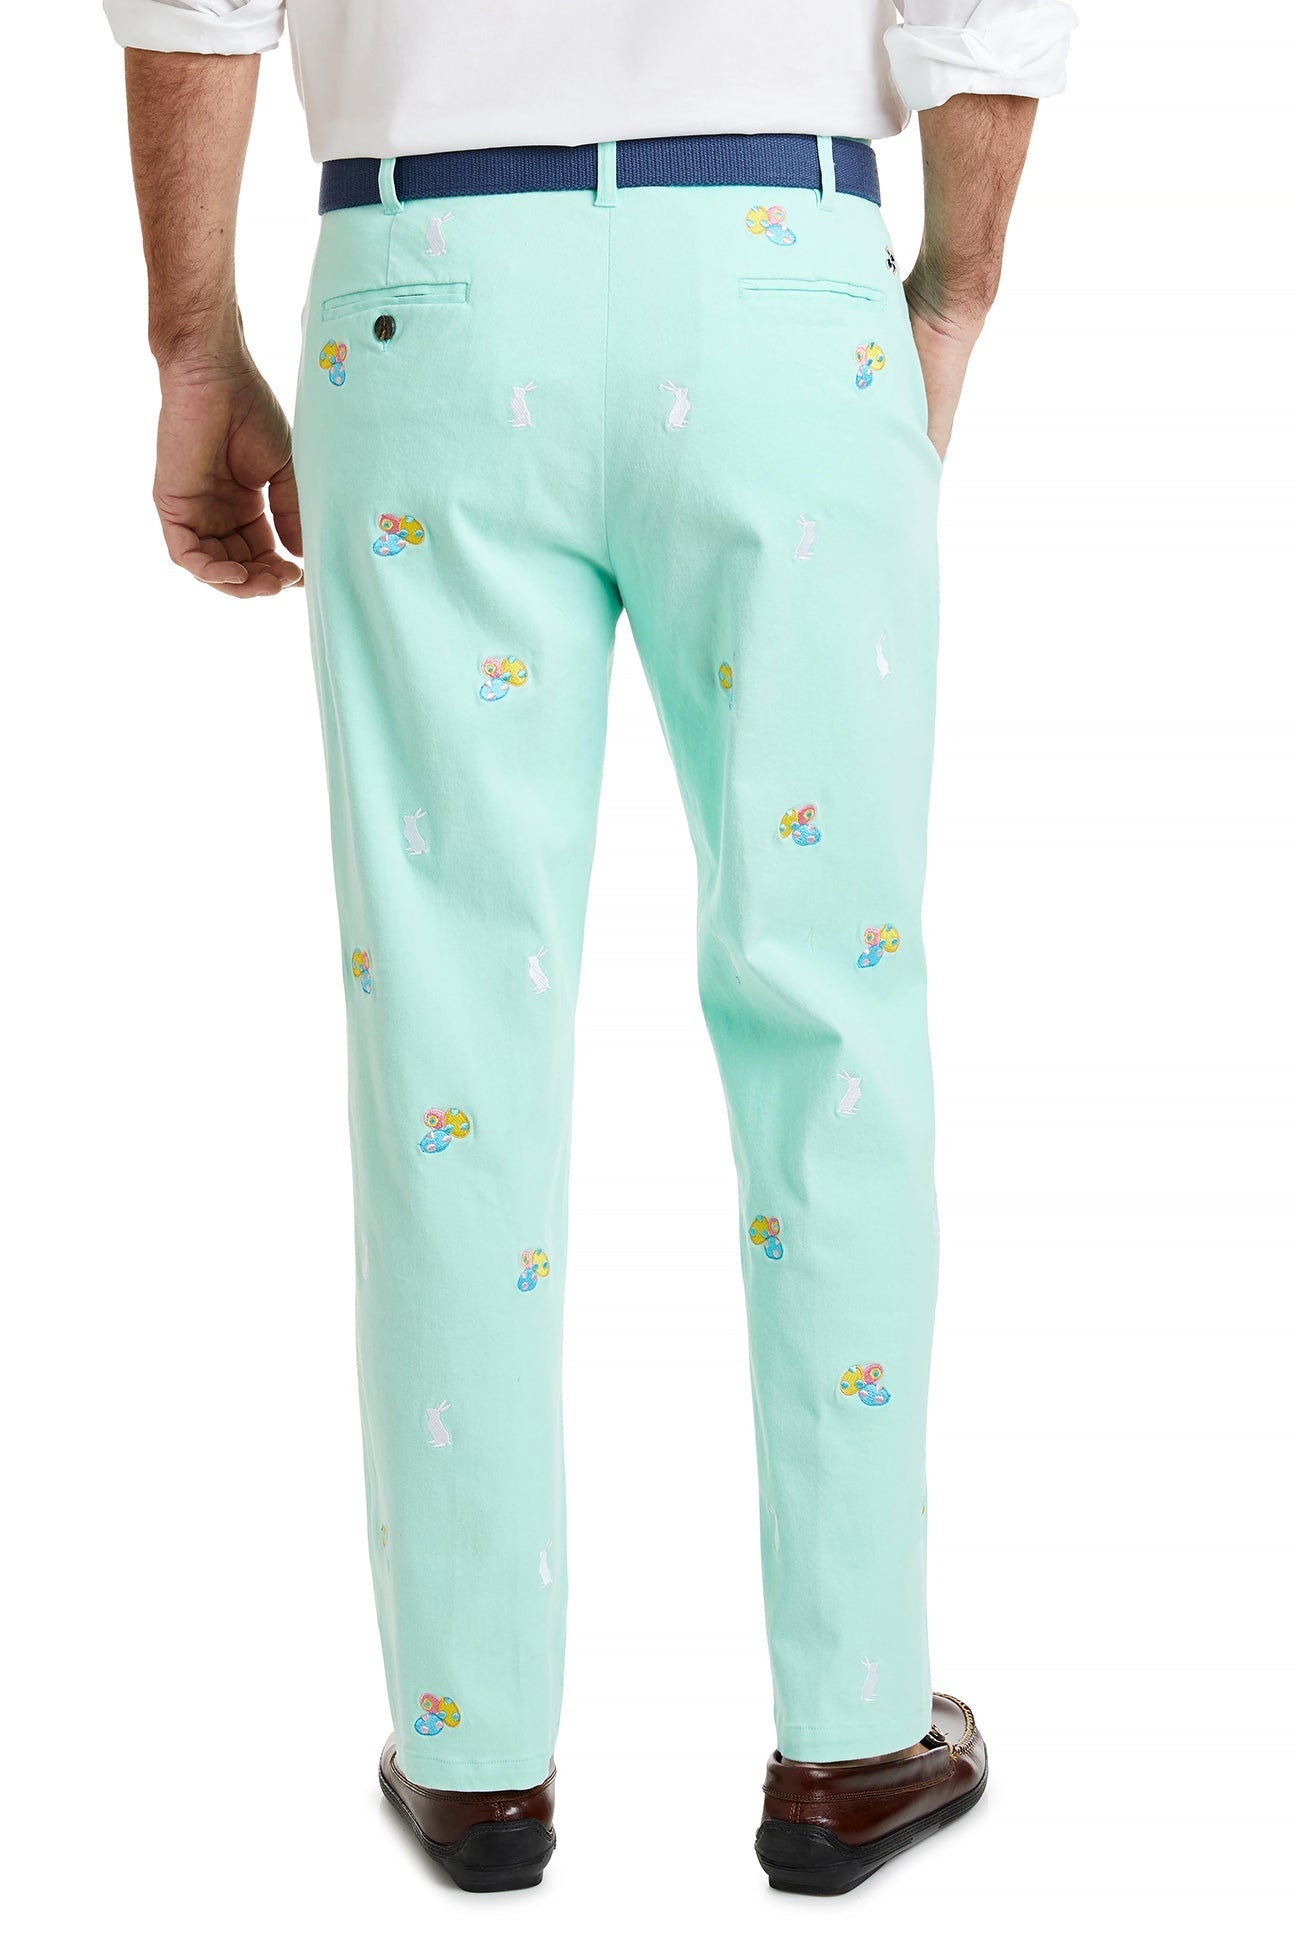 Harbor Pant Stretch Twill Seagrass with Easter Eggs & Bunny